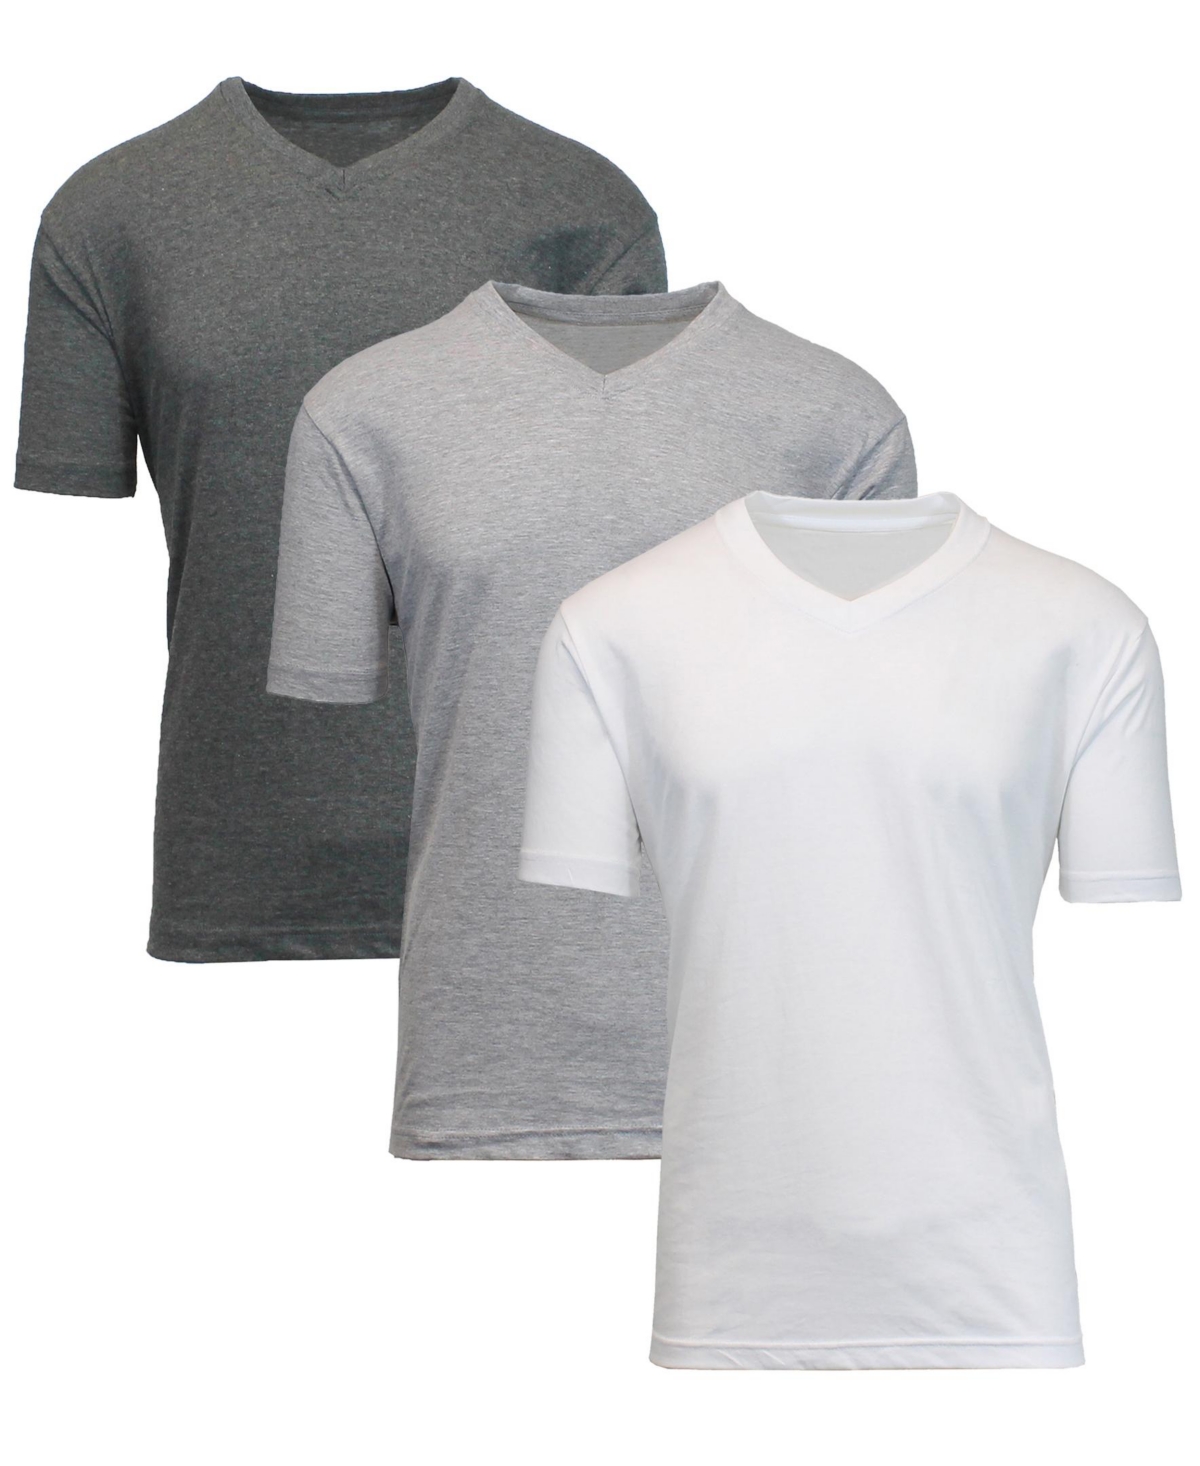 Blue Ice Men's Short Sleeve V-neck T-shirt, Pack Of 3 In Charcoal-heather Gray-white